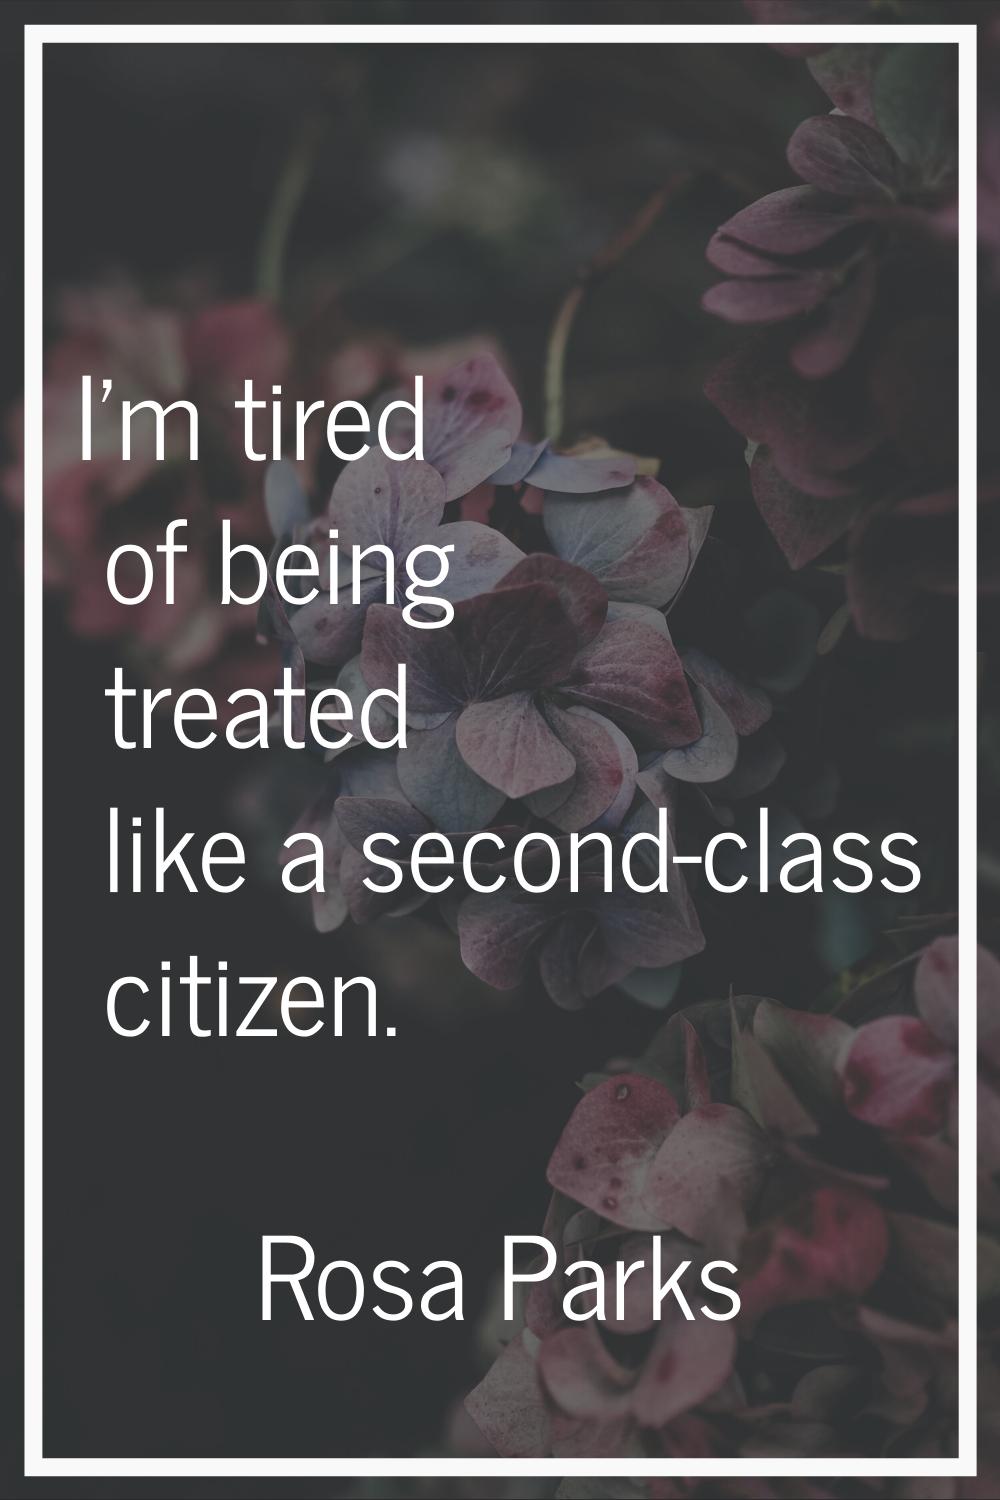 I'm tired of being treated like a second-class citizen.